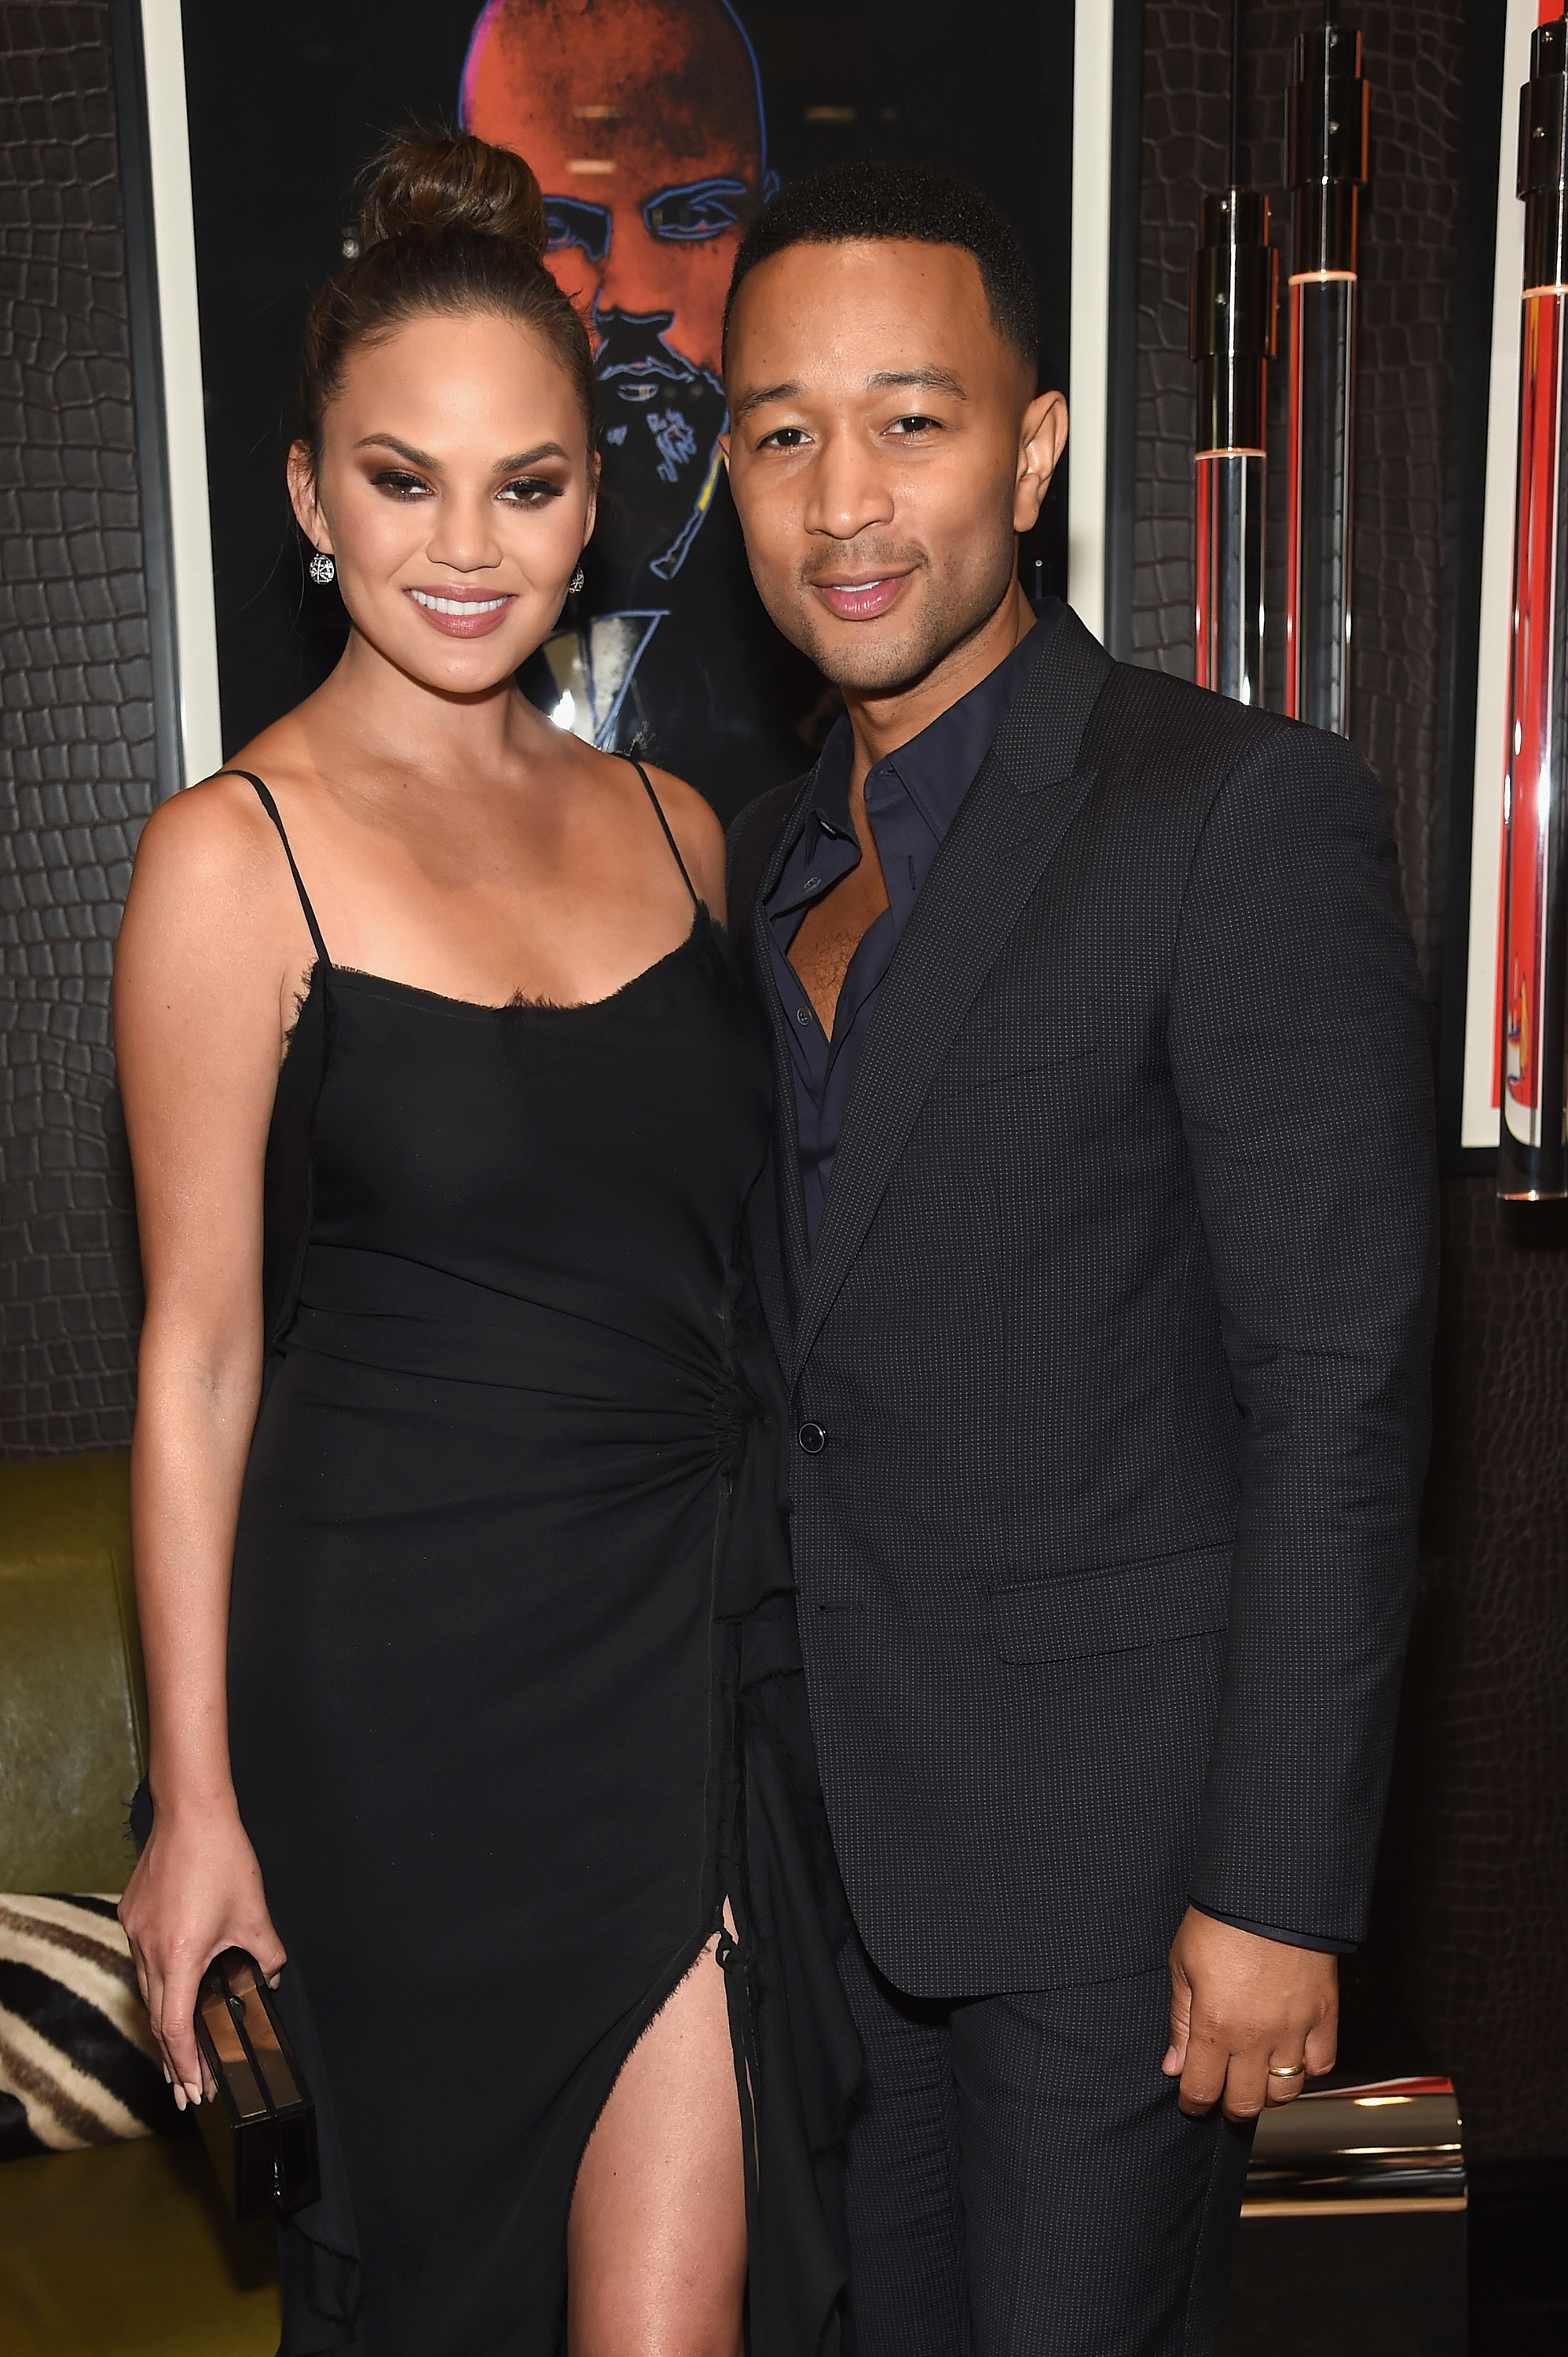 John Legends Wife Chrissy Teigen 5 Fast Facts You Need To Know